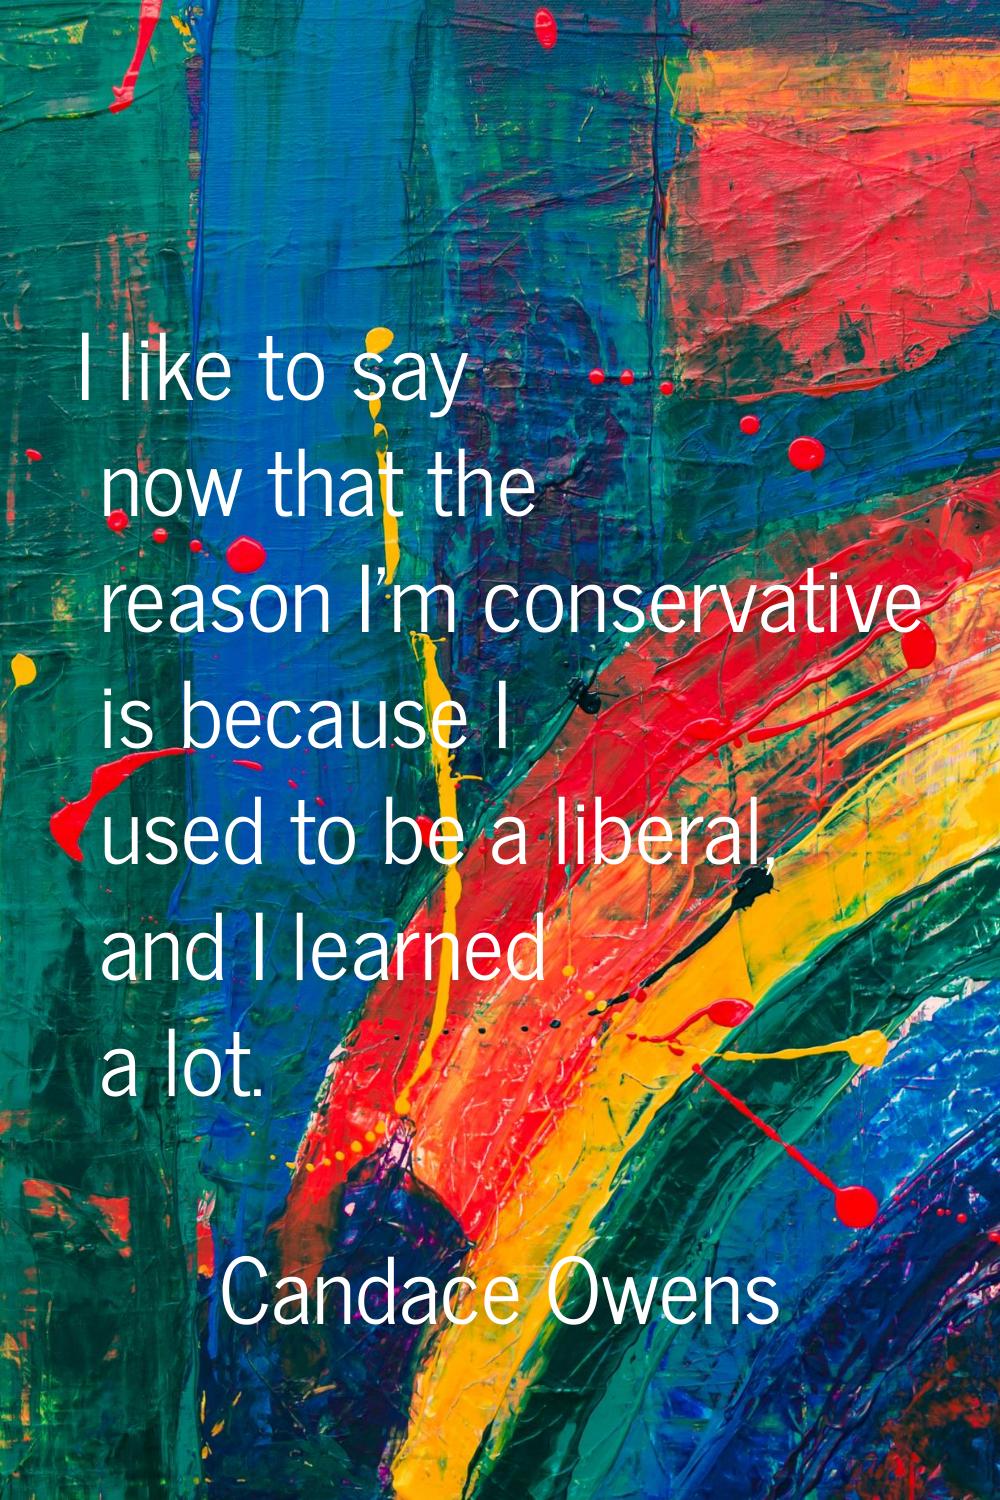 I like to say now that the reason I'm conservative is because I used to be a liberal, and I learned